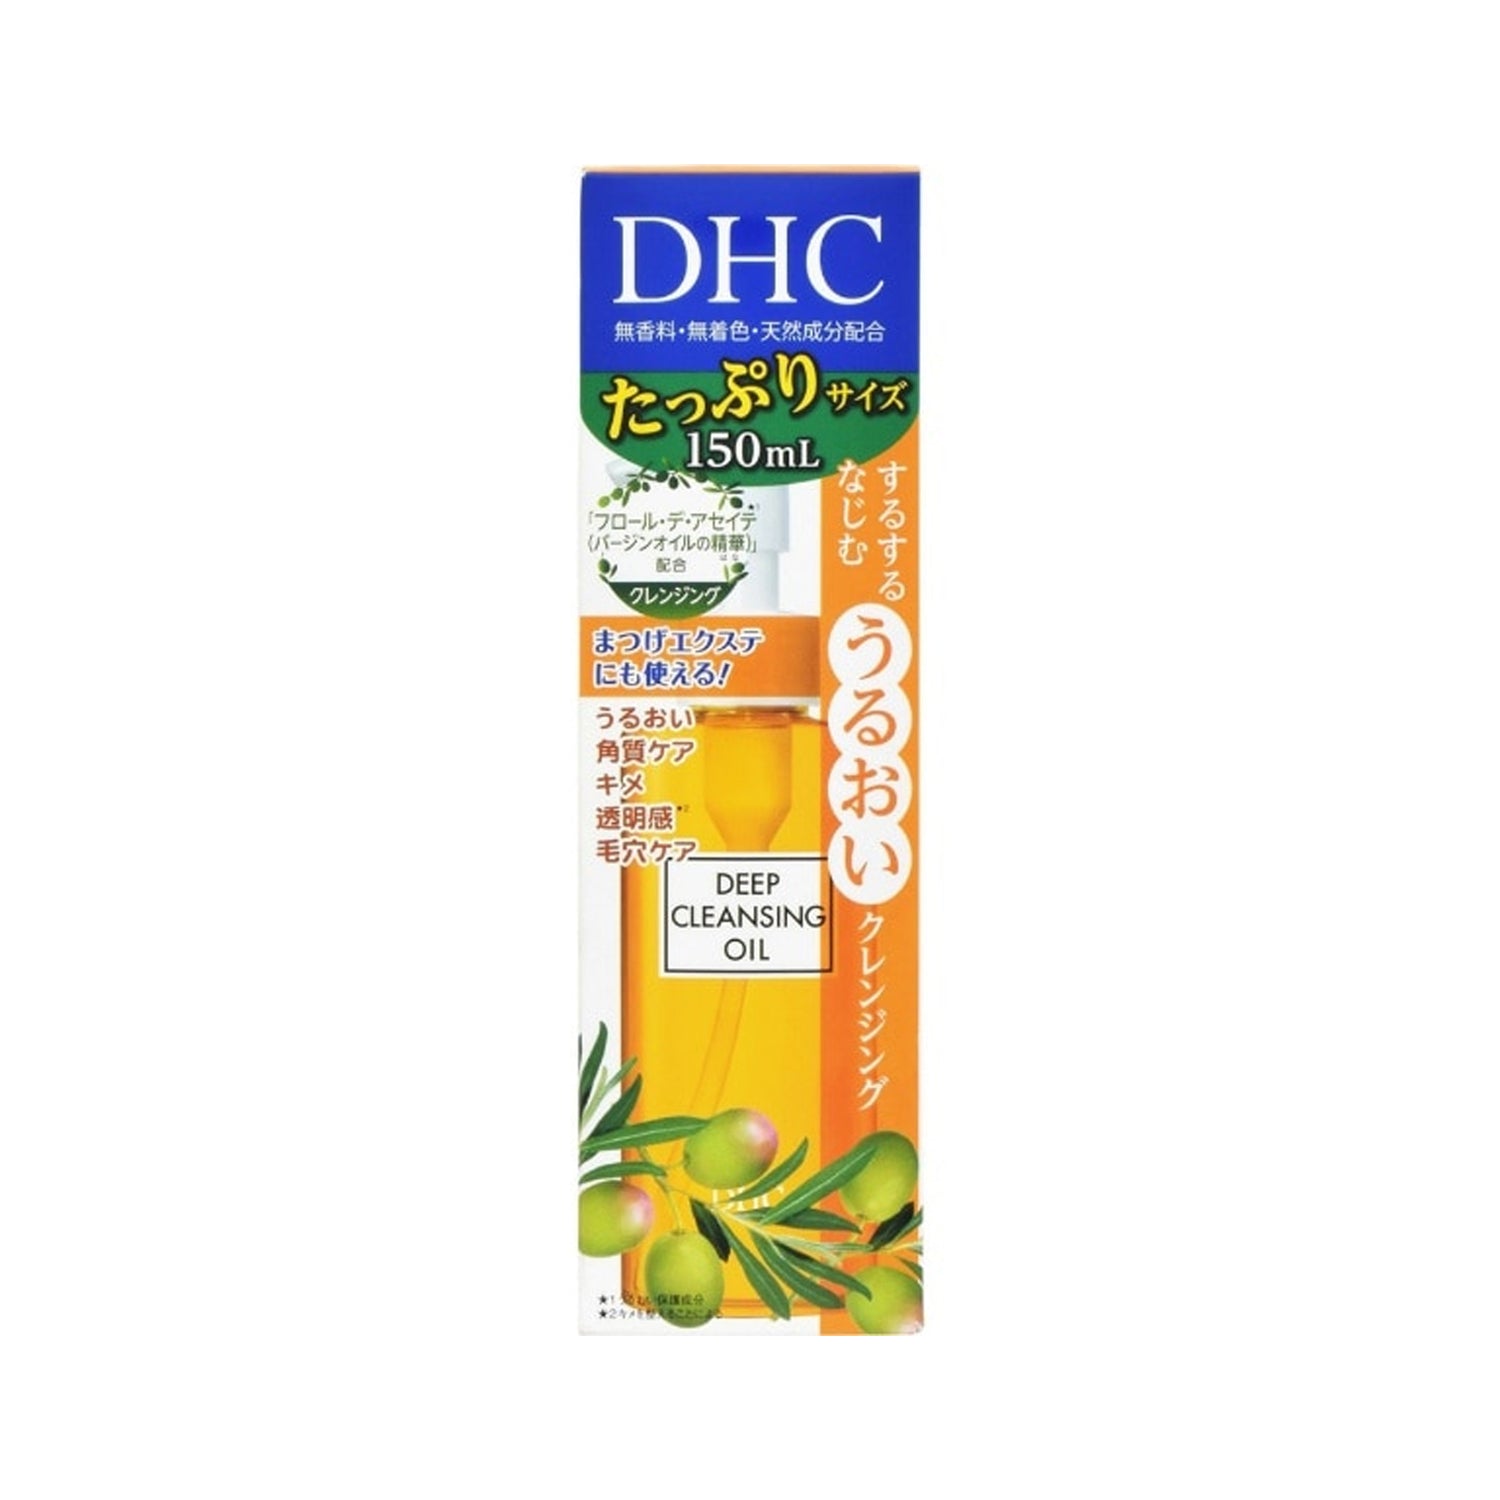 DHC Deep Cleansing Oil 150ml